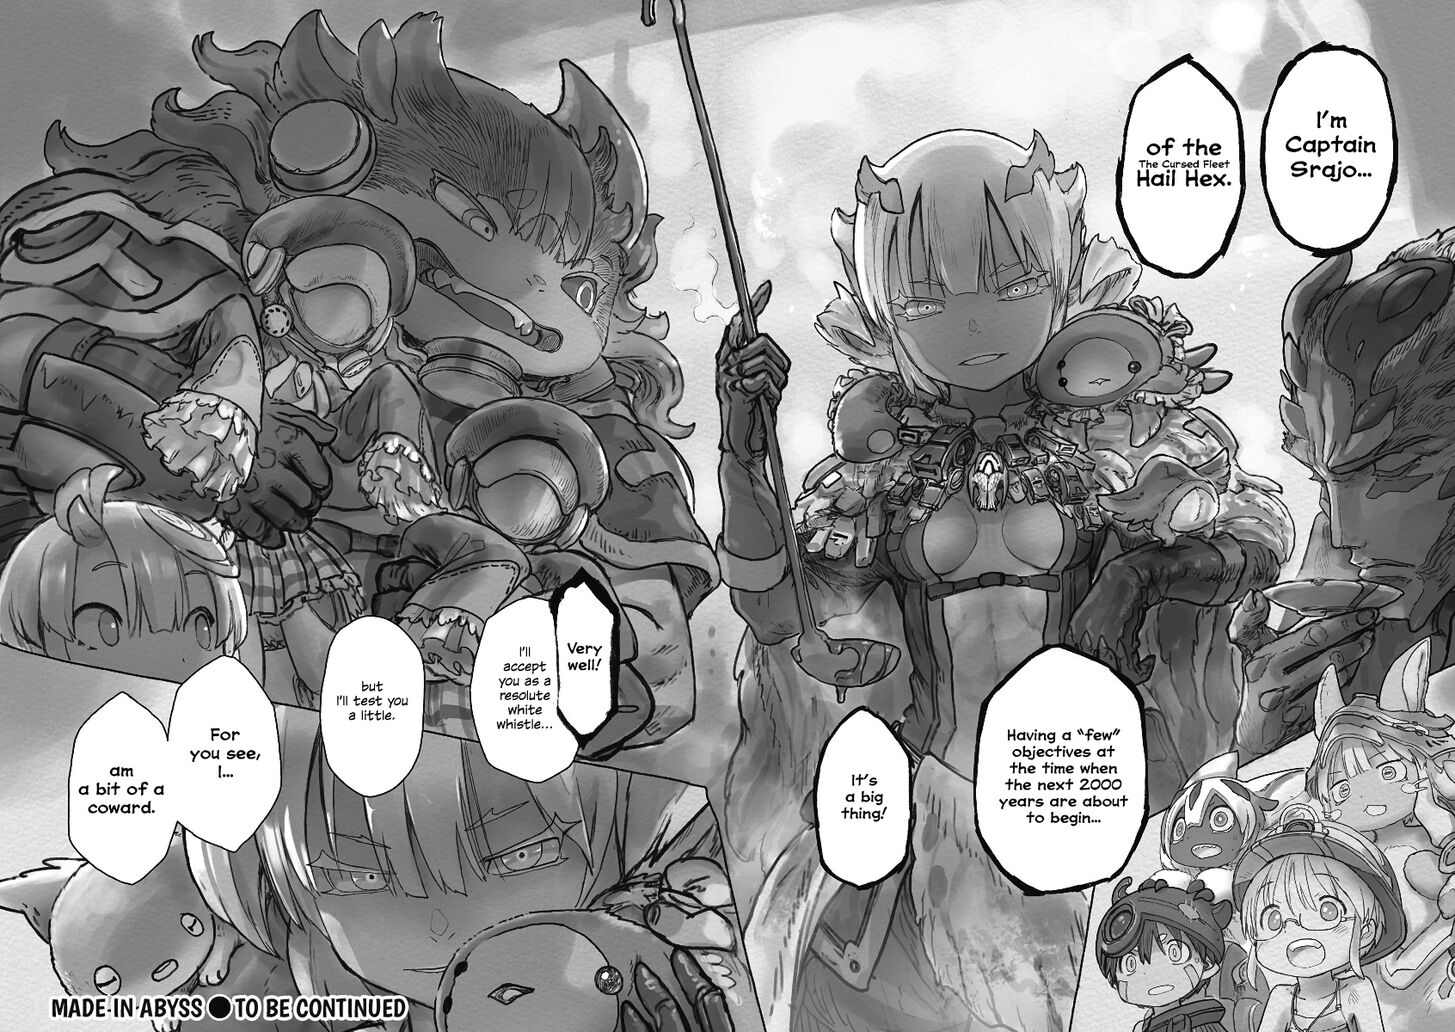 Made In Abyss Chapter 63 Made in Abyss, Chapter 63.2 - Made in Abyss Manga Online